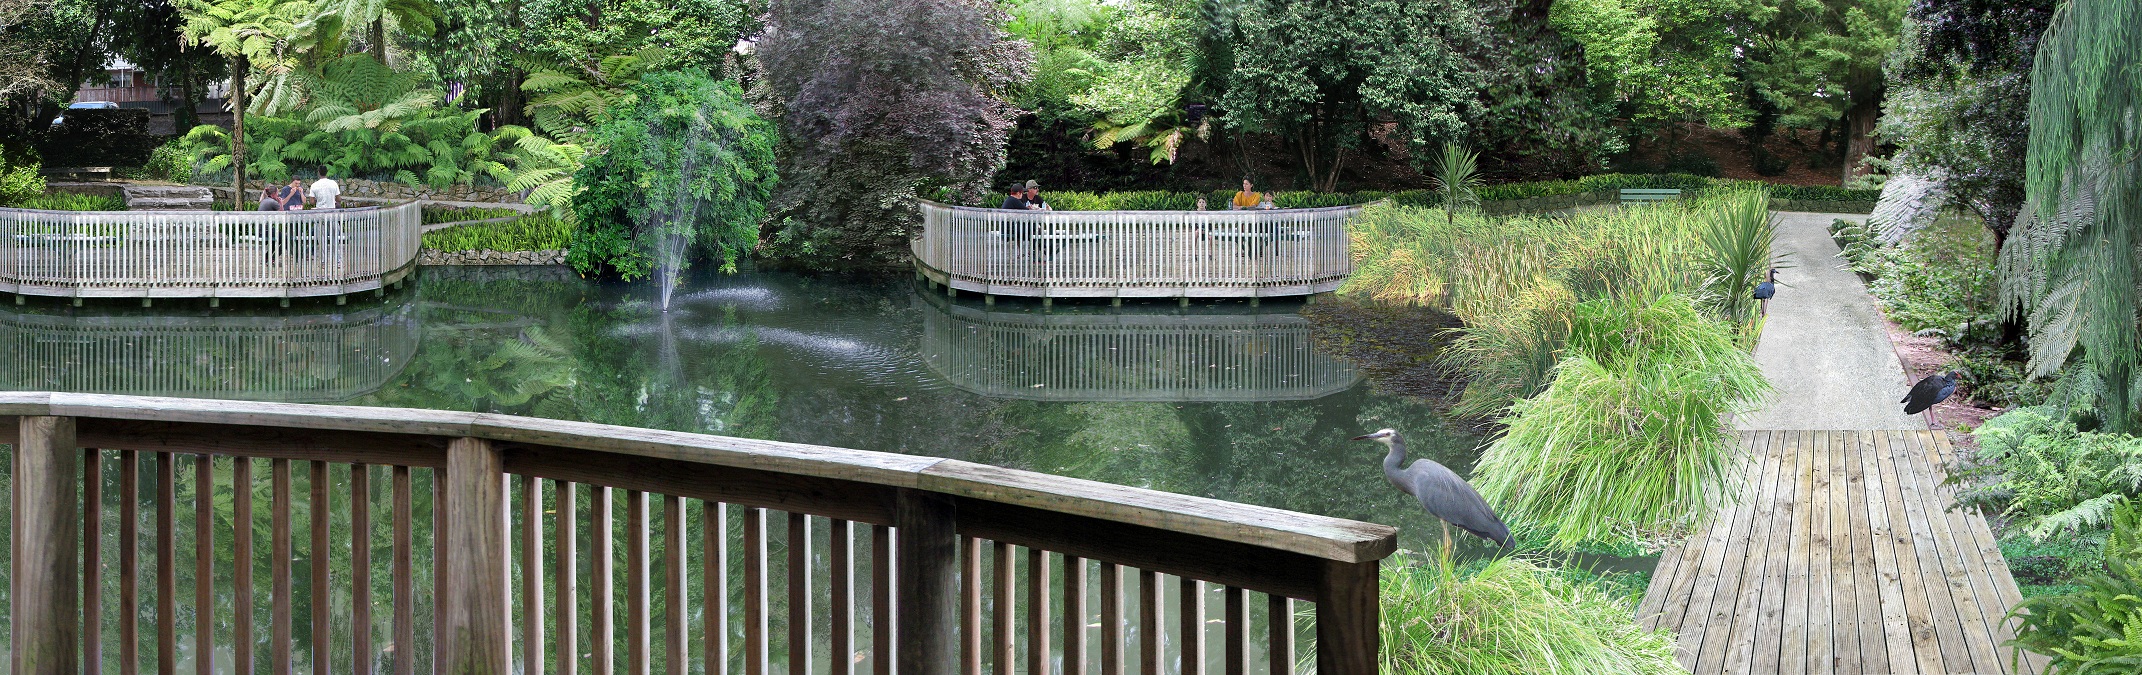 Babbages Boating Lake Coves realised as Picnic Decks